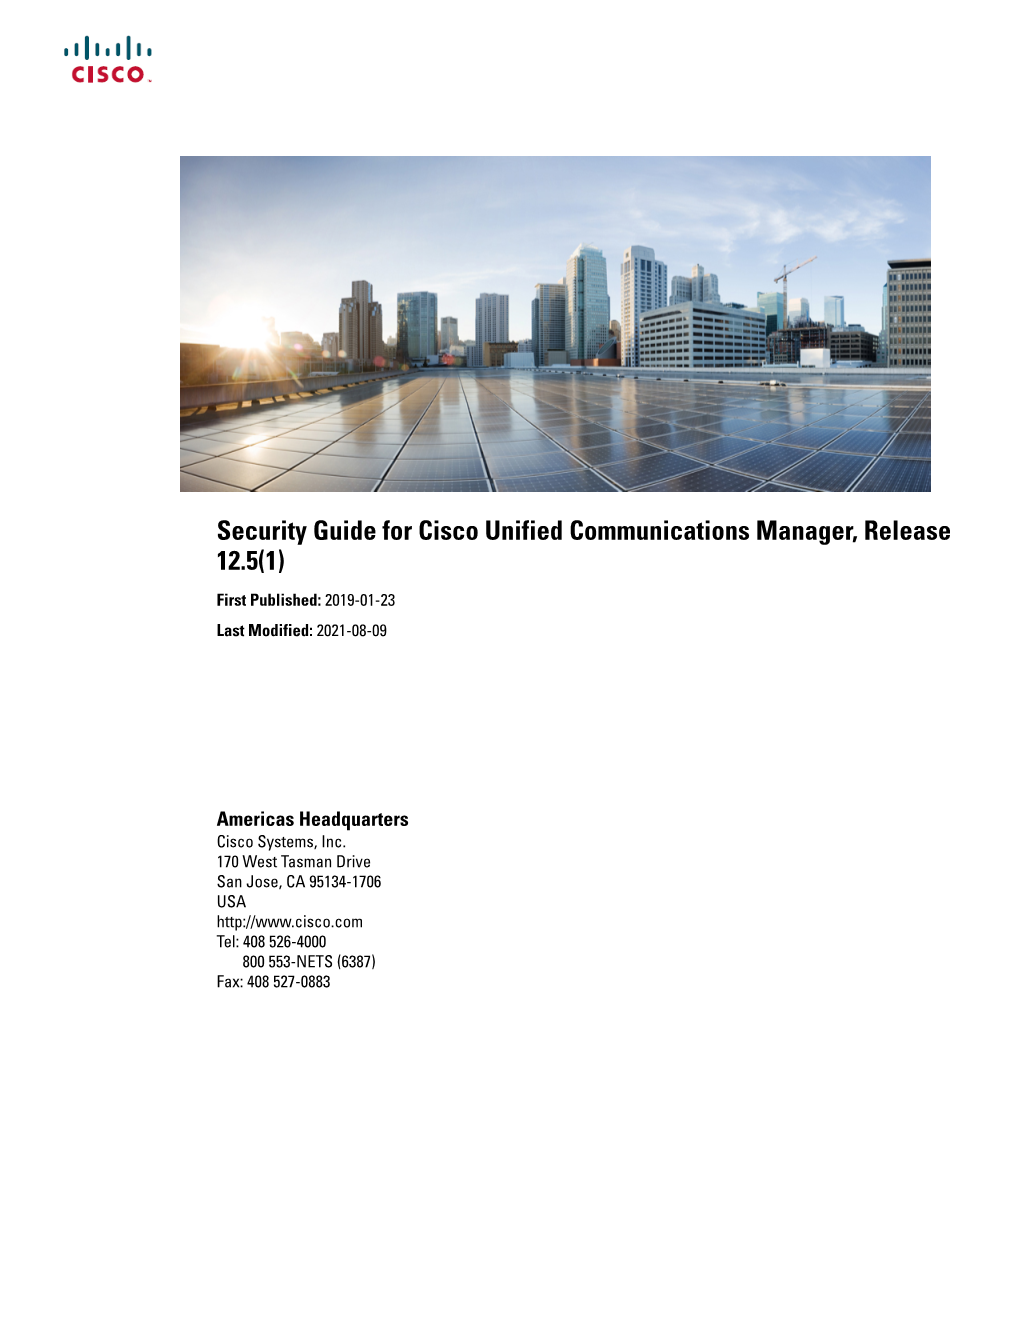 Security Guide for Cisco Unified Communications Manager, Release 12.5(1)